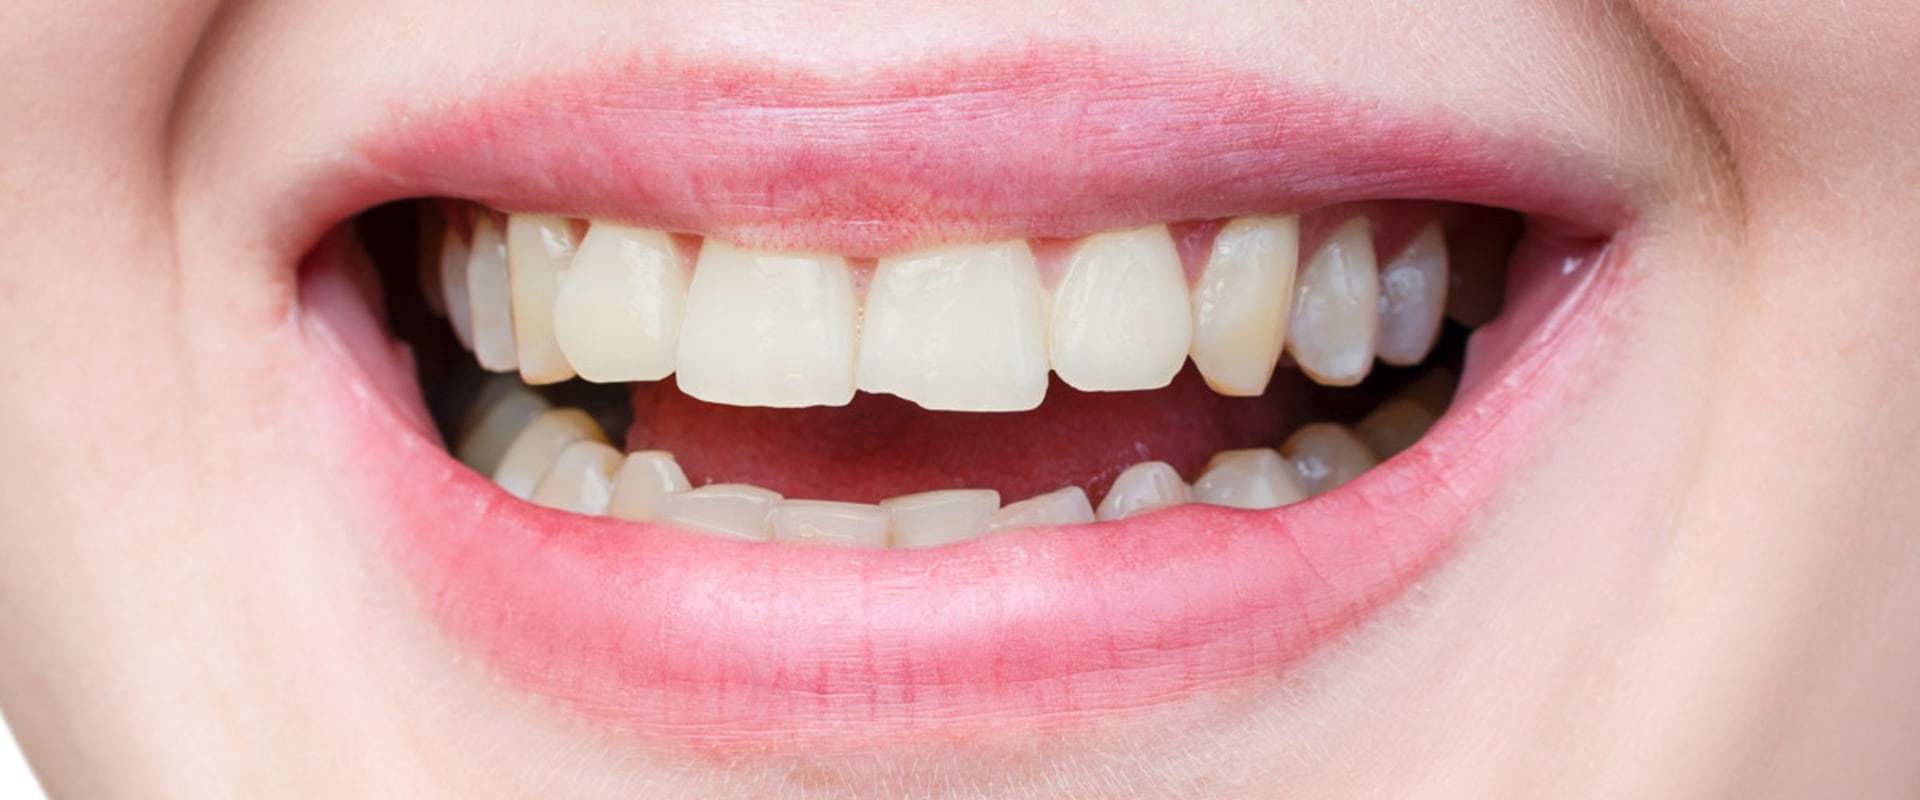 Can a Chipped Tooth be Permanently Fixed?